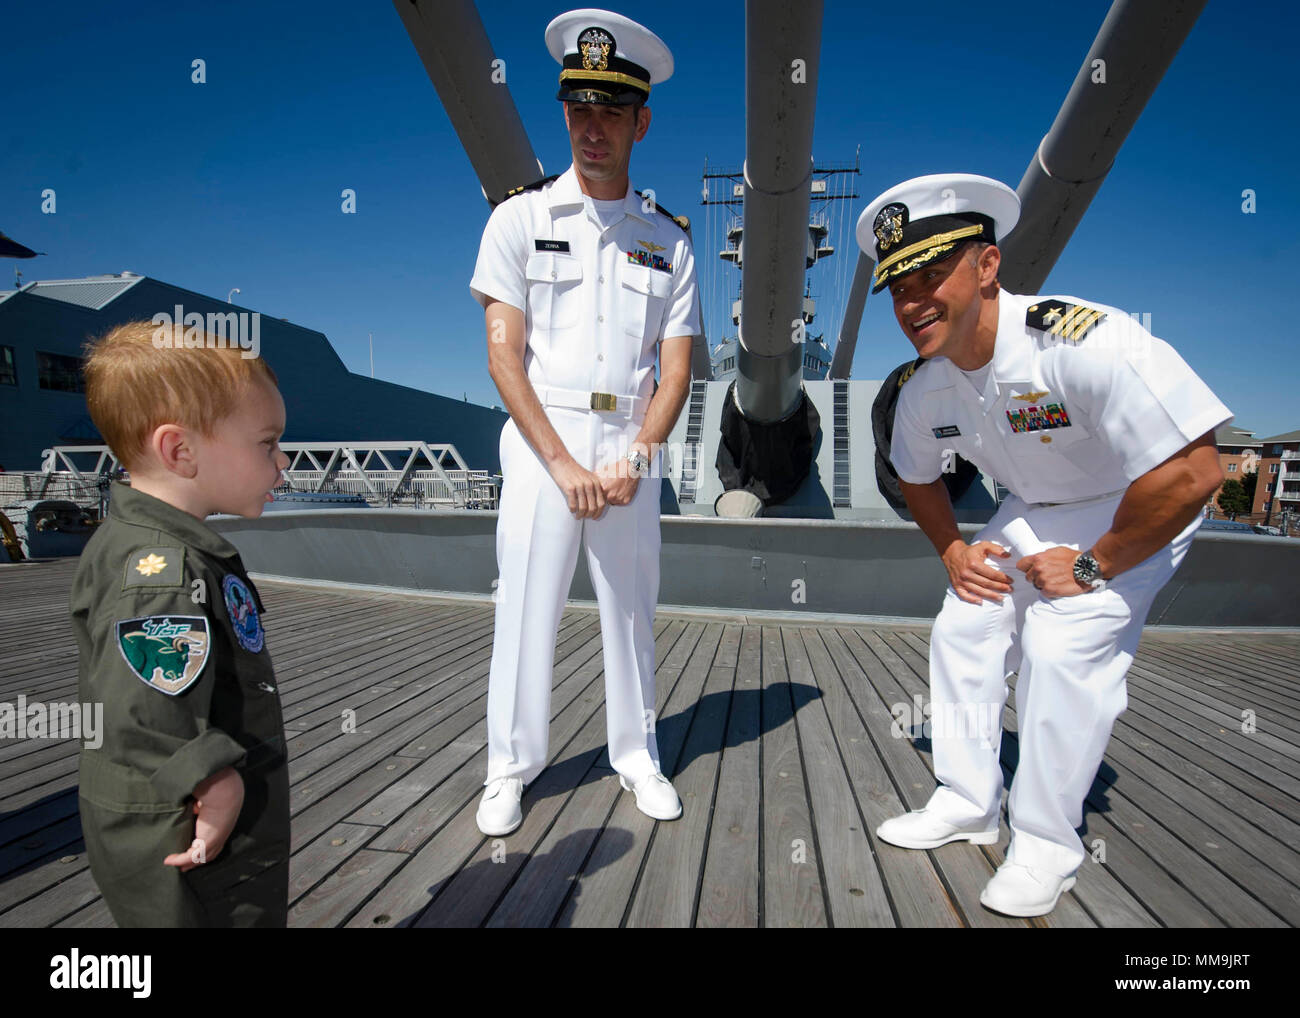 170908-N-GR120-054  NORFOLK (Sept. 8, 2017) Cmdr. Jason Sherman, right, assigned to the Nimitz-class aircraft carrier USS George Washington (CVN 73) Lt. Joey Zerra's, son before promoting Zerra to Lt. Cmdr. during a ceremony aboard the Iowa-class battleship USS Wisconsin (BB-64). George Washington is undergoing a refueling and complex overhaul (RCOH) at Newport News Shipyard. RCOH is a four-year project performed only once during a carrier’s 50-year service life that includes refueling of the ship’s two nuclear reactors, significant repairs, upgrades and modernizations. (U.S. Navy photo by Mas Stock Photo